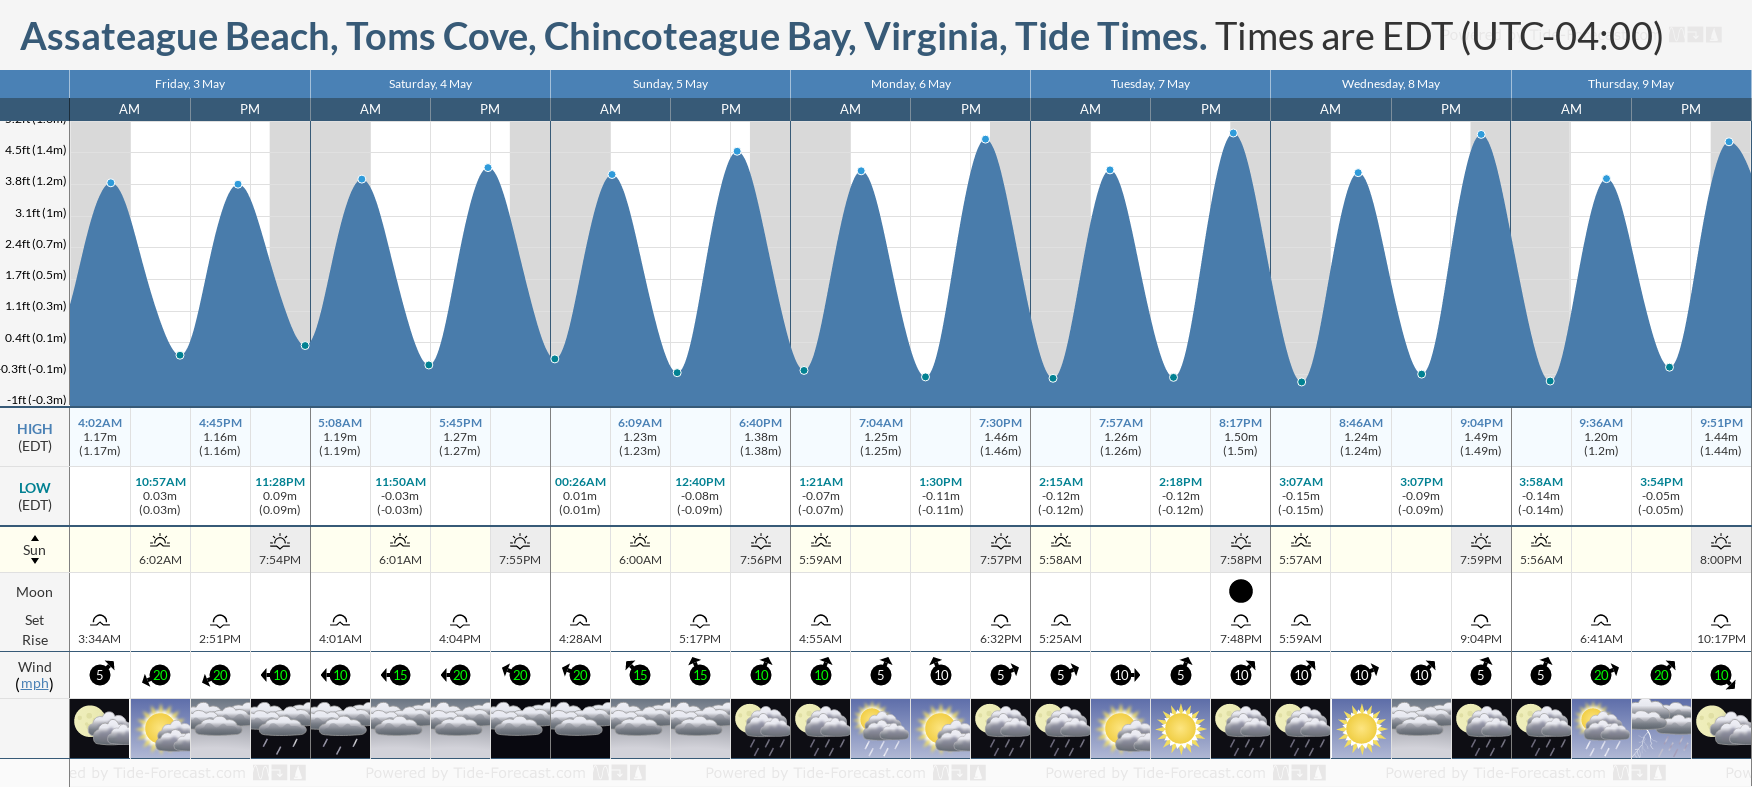 Assateague Beach, Toms Cove, Chincoteague Bay, Virginia Tide Chart including high and low tide times for the next 7 days